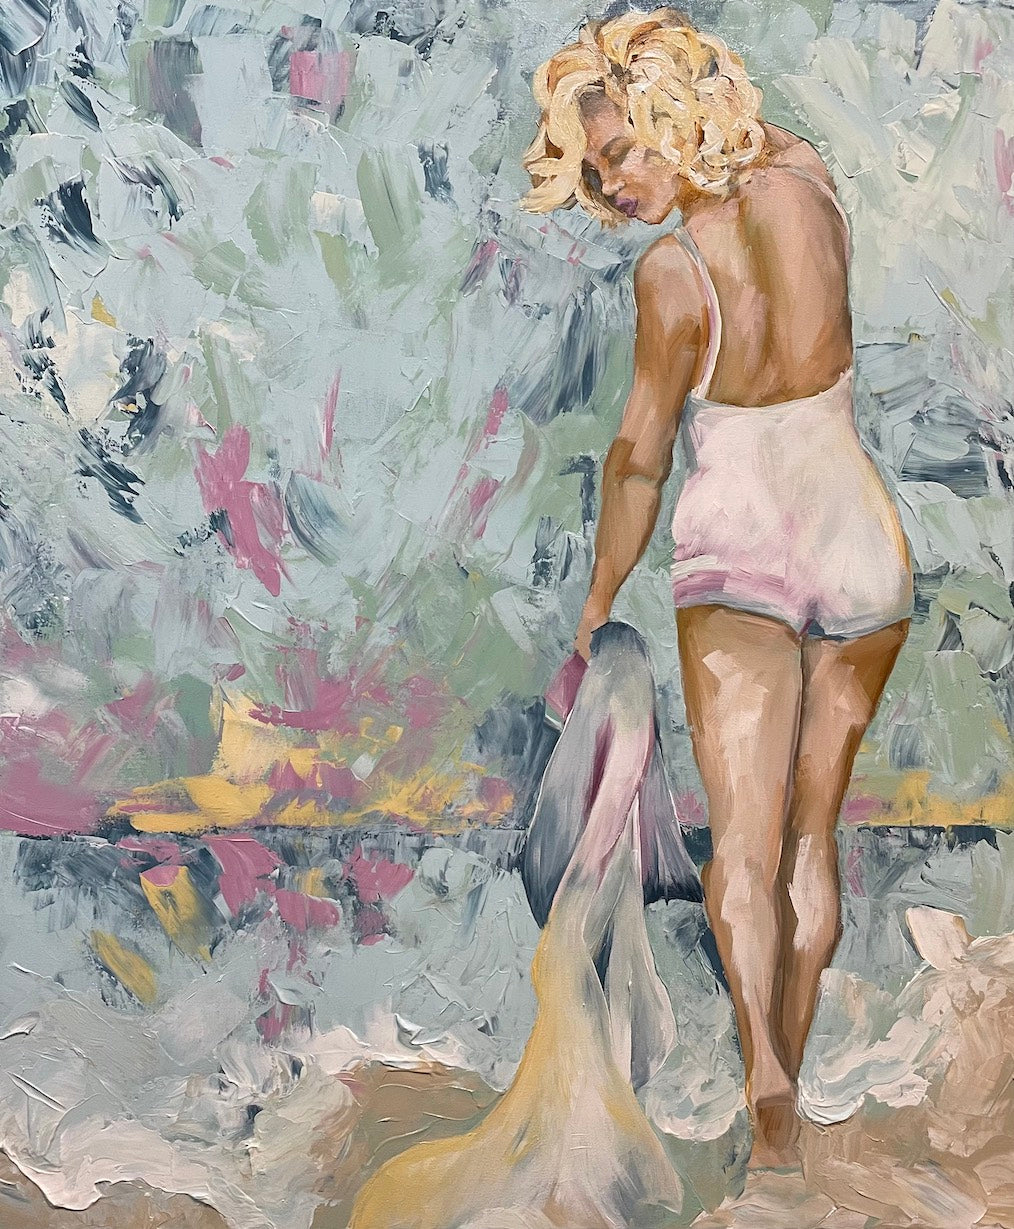 Marilyn Monroe inspired painting showing Marilyn in a contemporary beach setting, holding a towel at the waters edge, against a backdrop of soft tones of aqua, blue, pink, gold.